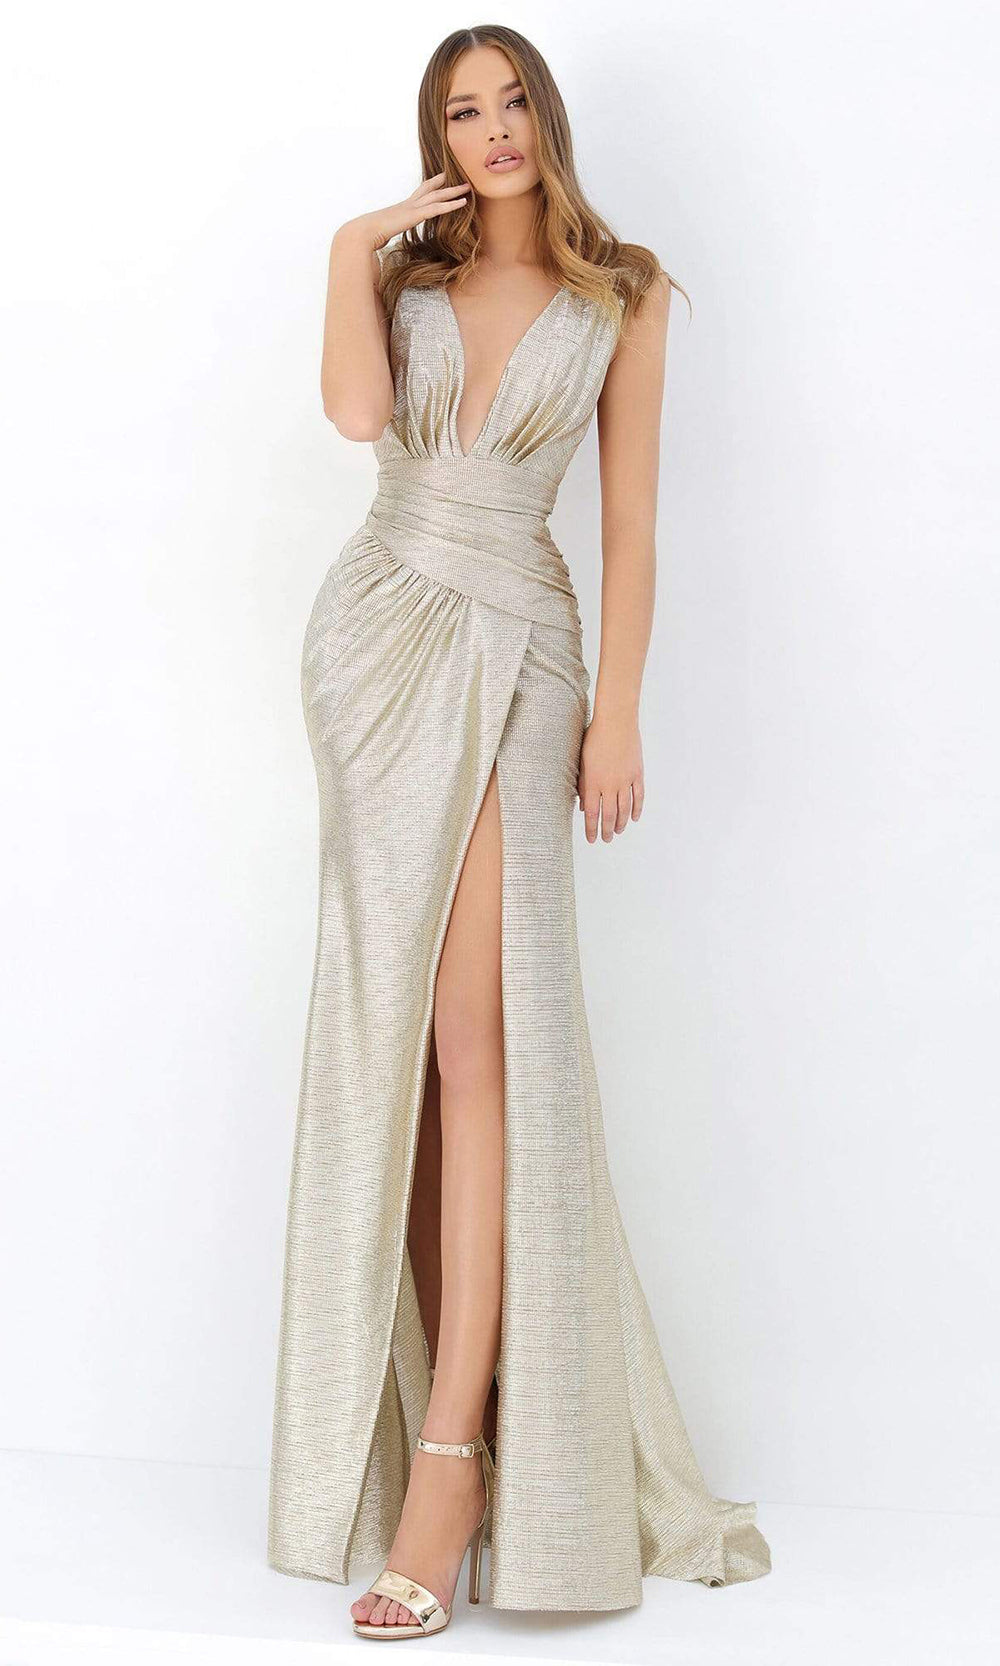 Tarik Ediz - Plunging V-Neck Ruched Dress with Slit 93922 - 1 pc Gold In Size 4 Available CCSALE 4 / Gold